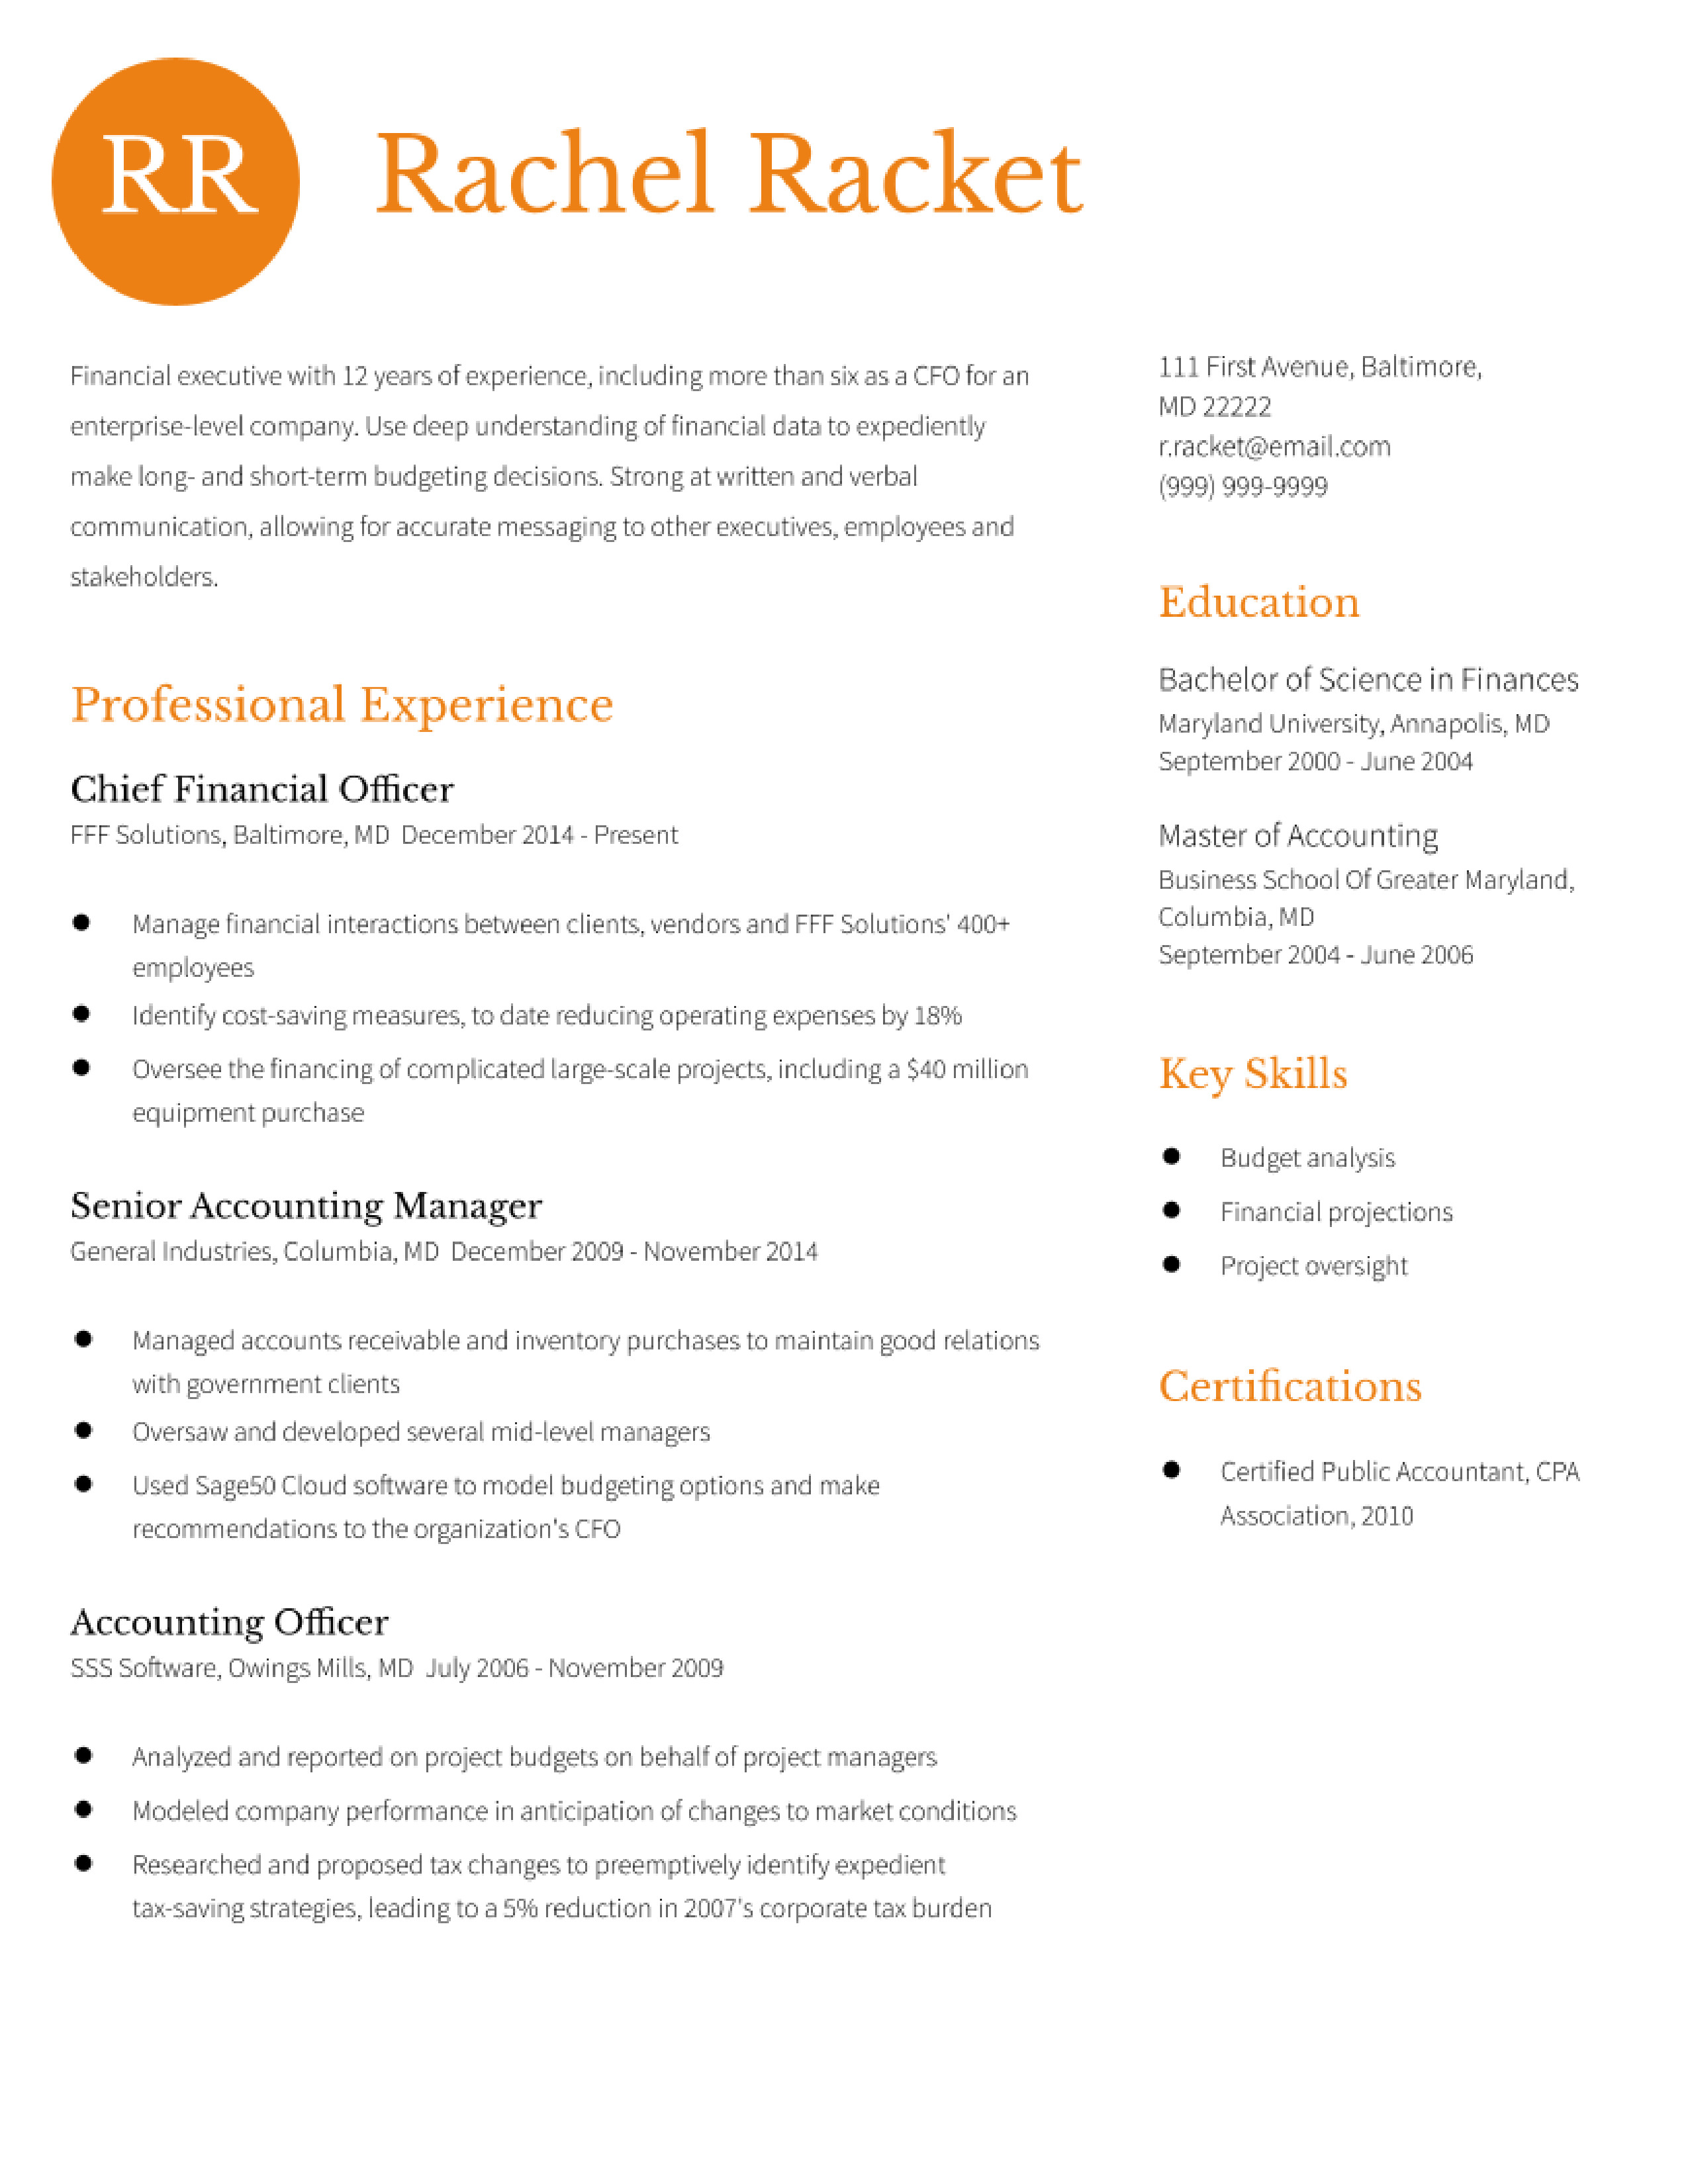 Chief-Financial-Officer-CFO_10-Years.pdf